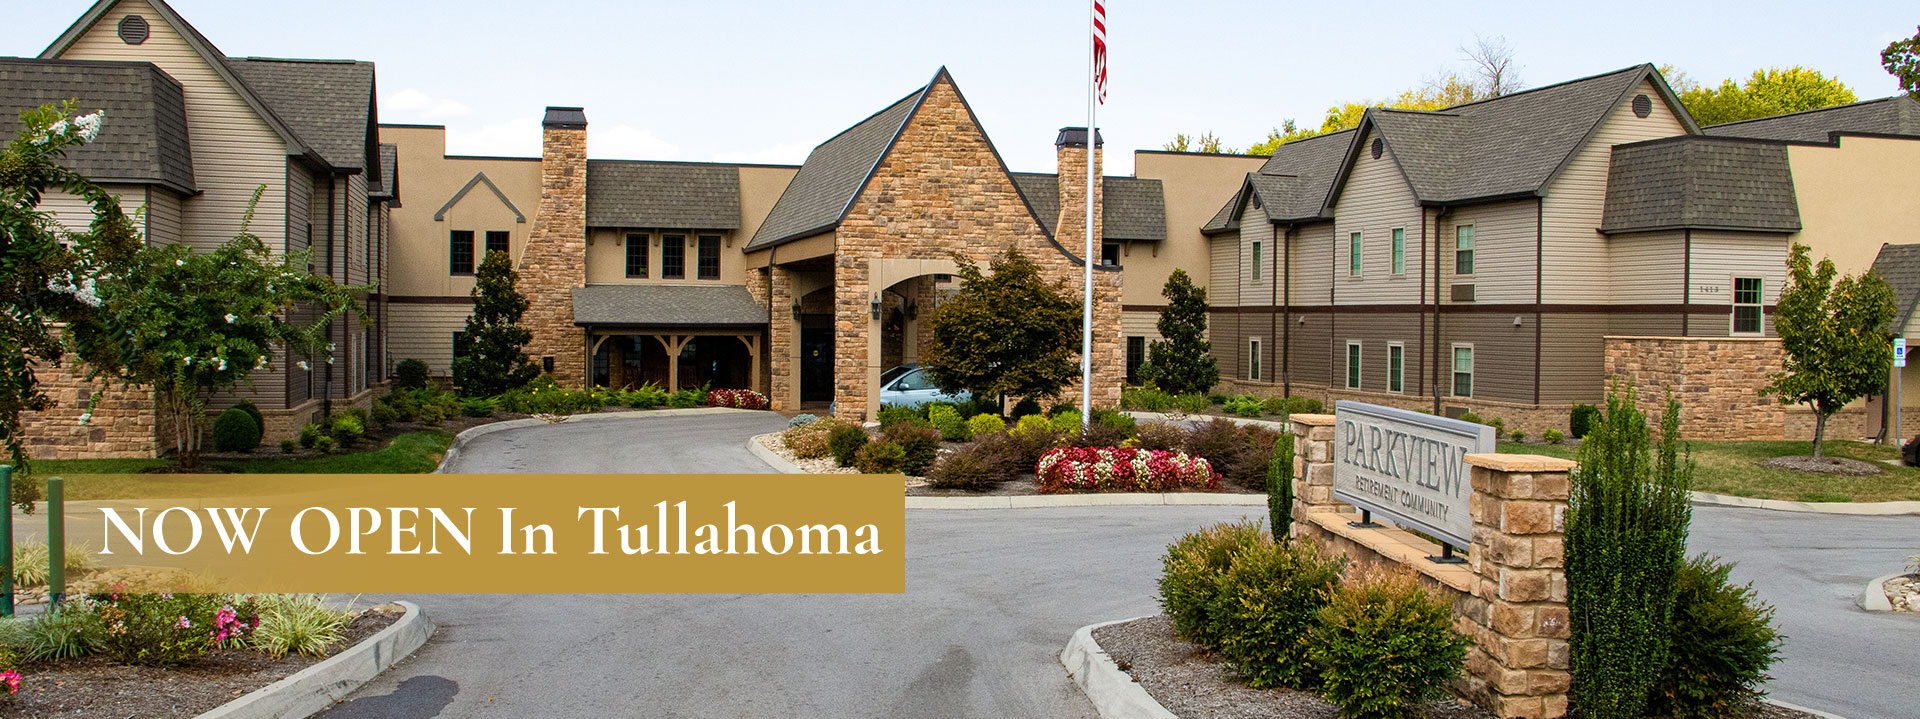 Parkview Senior Living community is now open in Tullahoma, TN